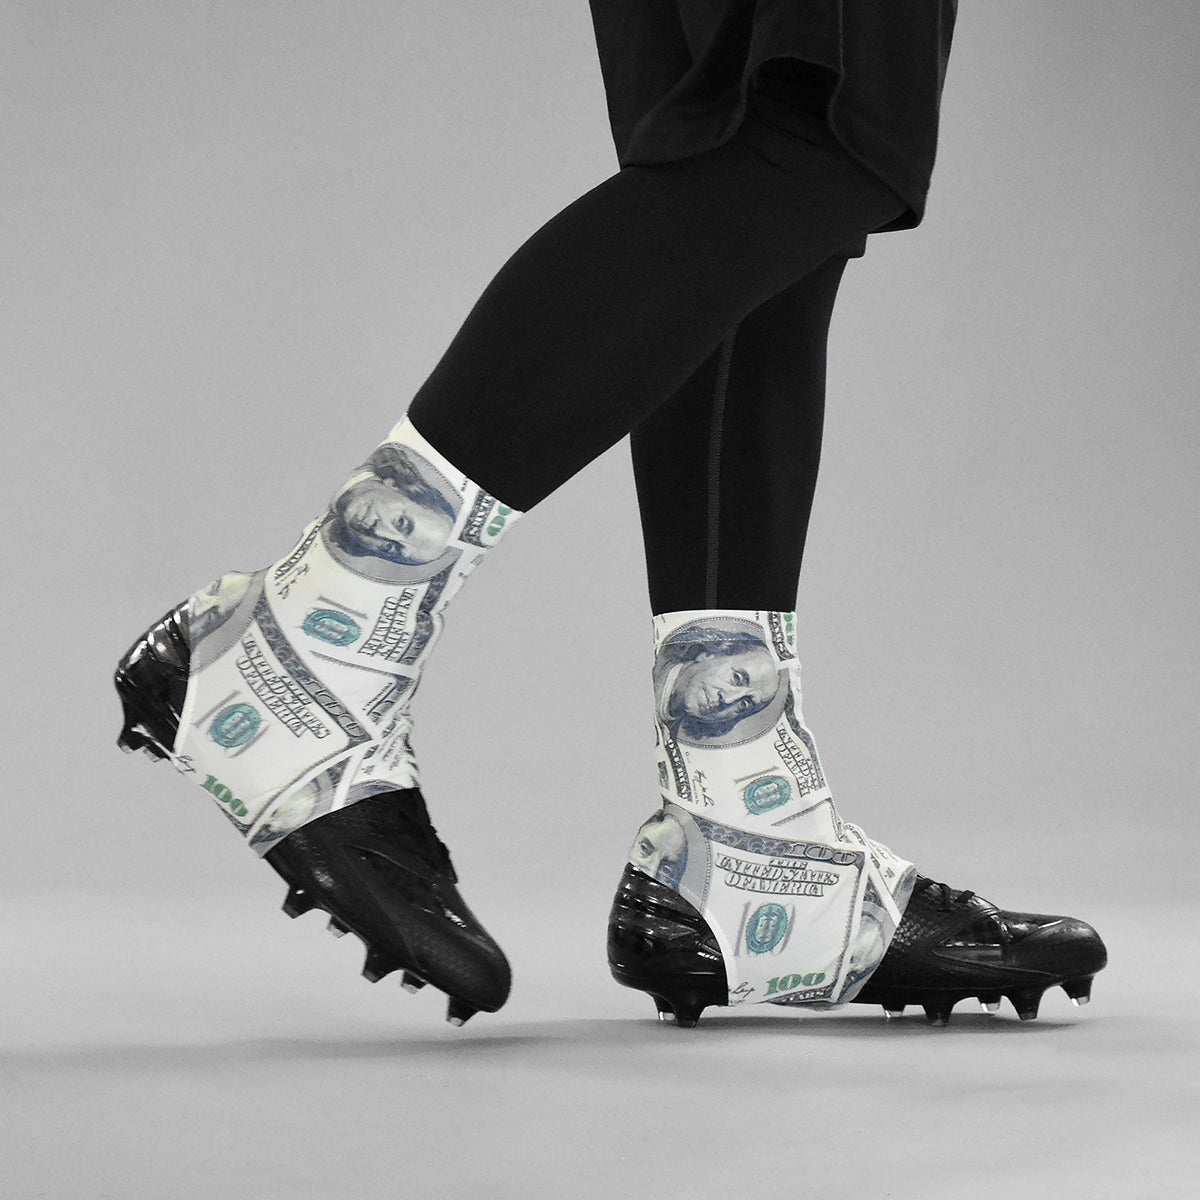 Money Benjamins Spats / Cleat Covers